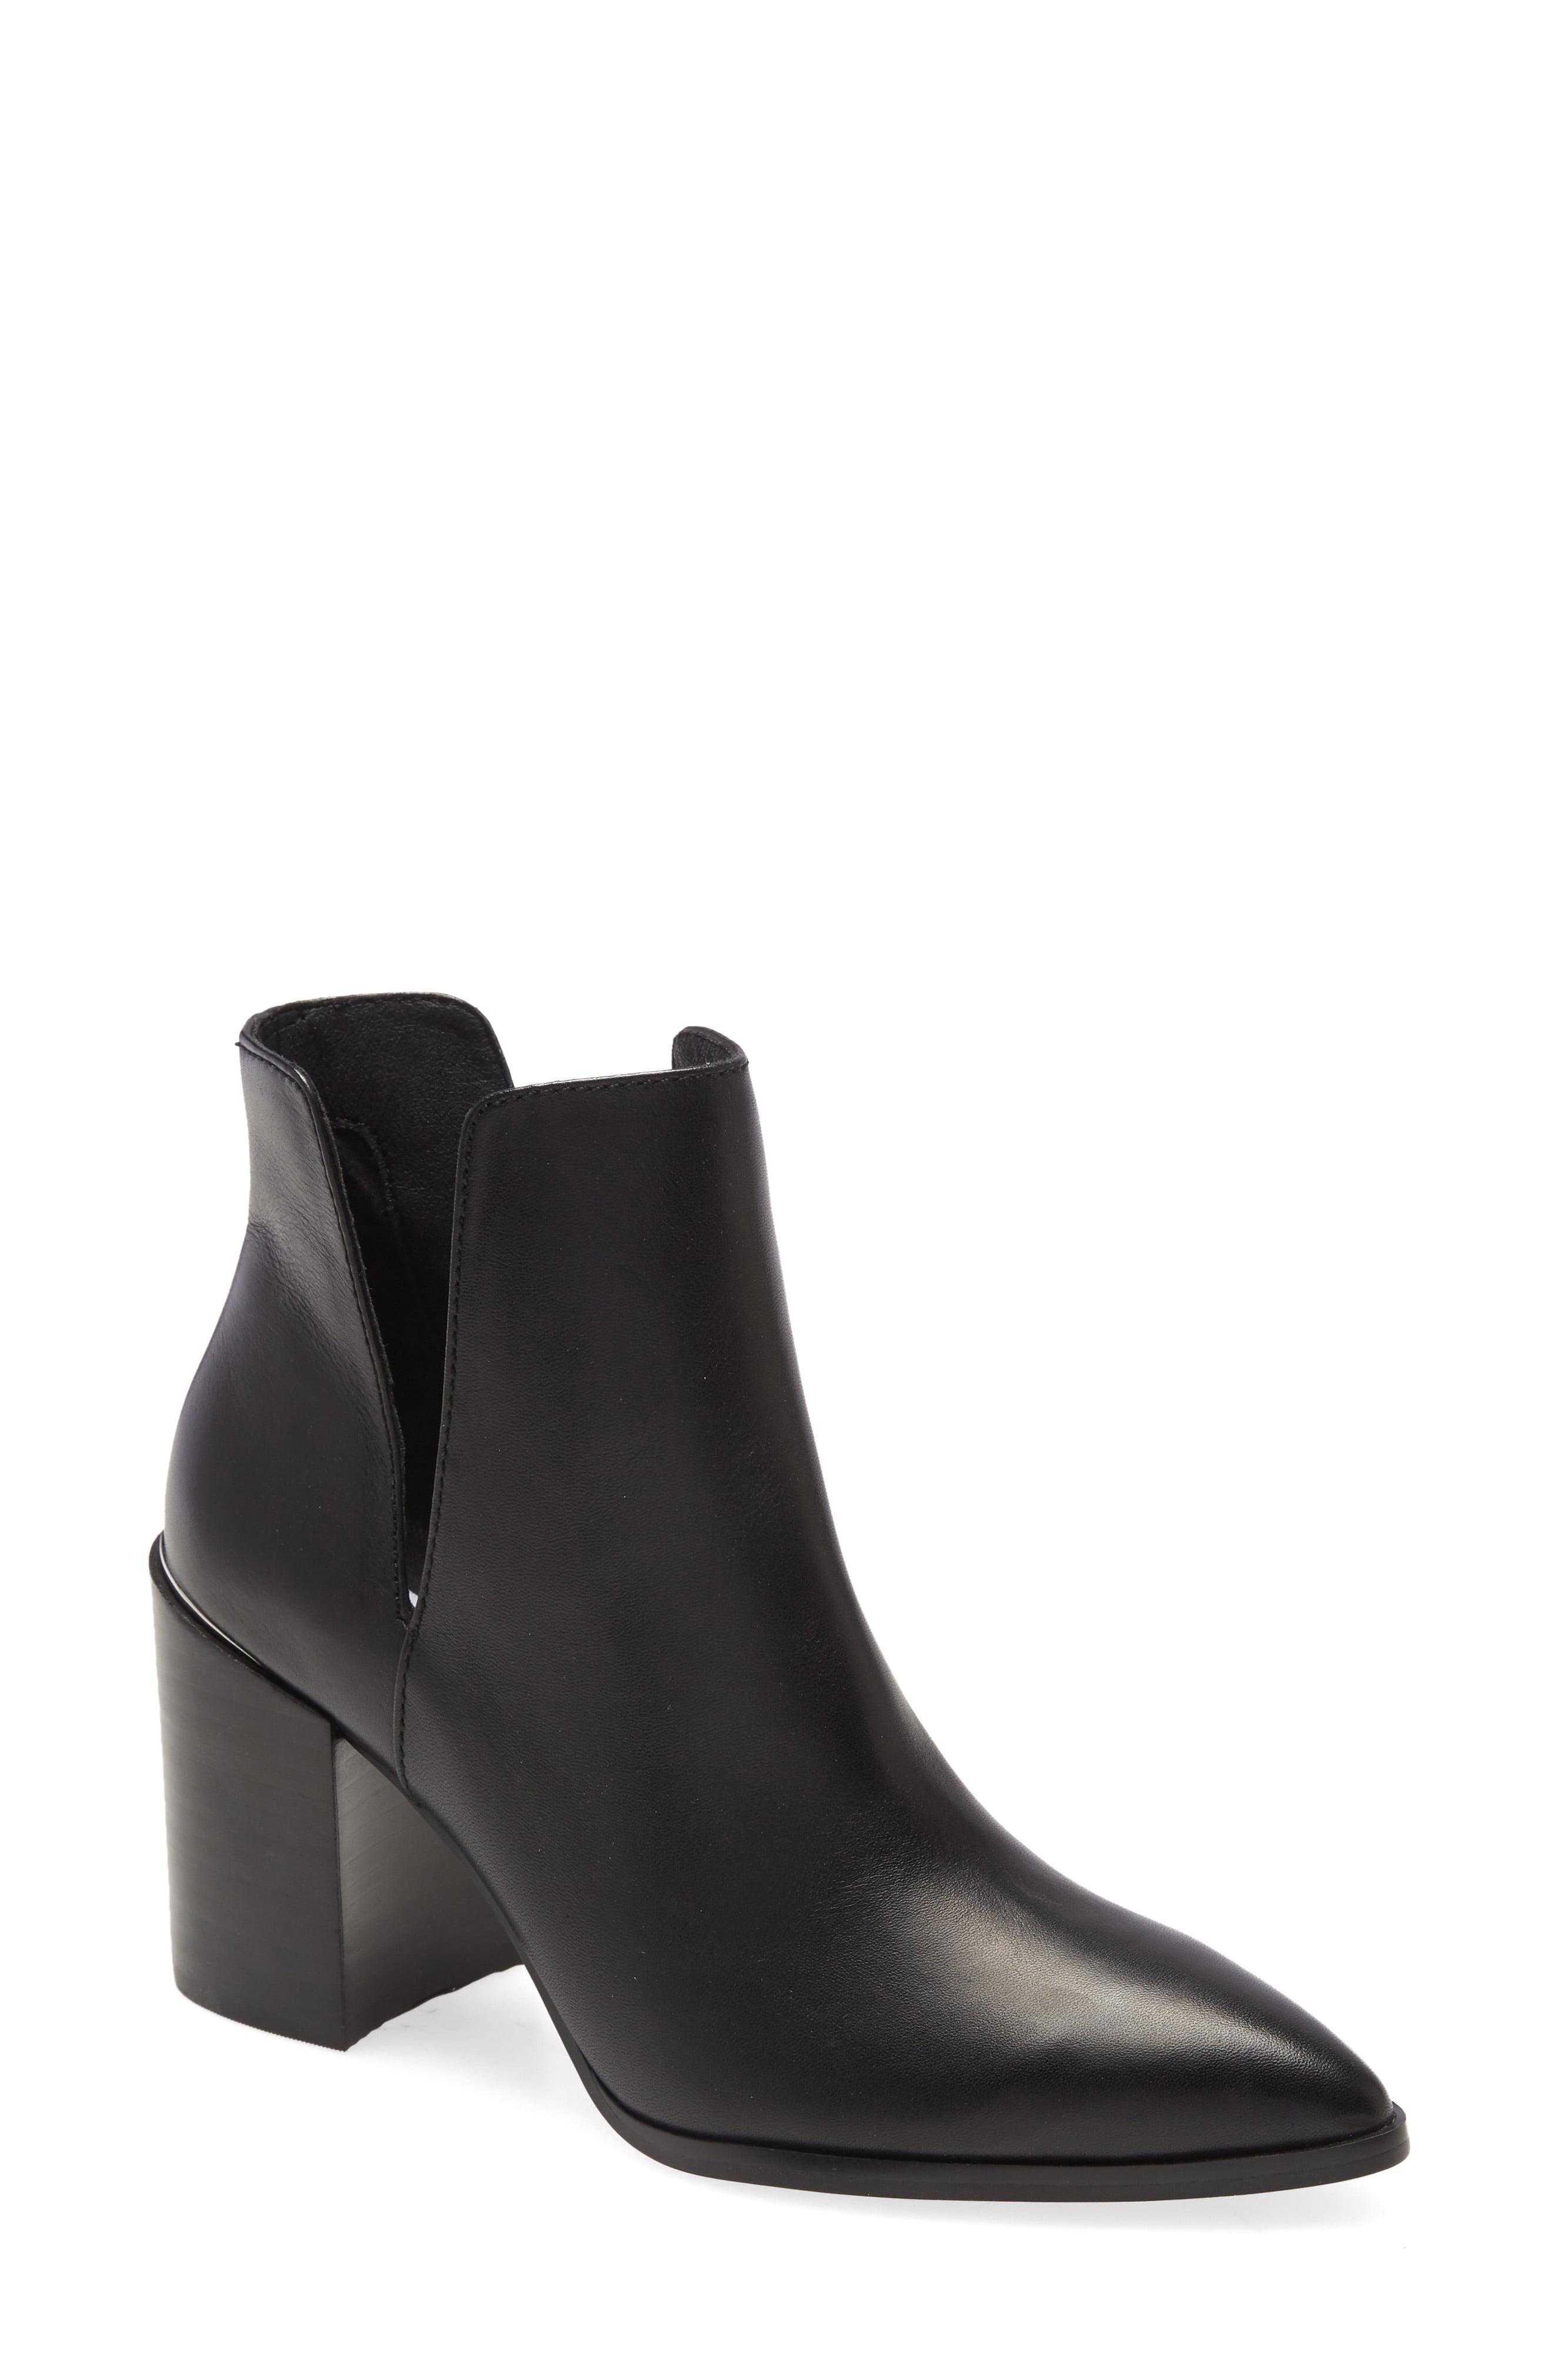 Steve Madden Kaylah Pointed Toe Bootie in Black Leather (Black) - Lyst